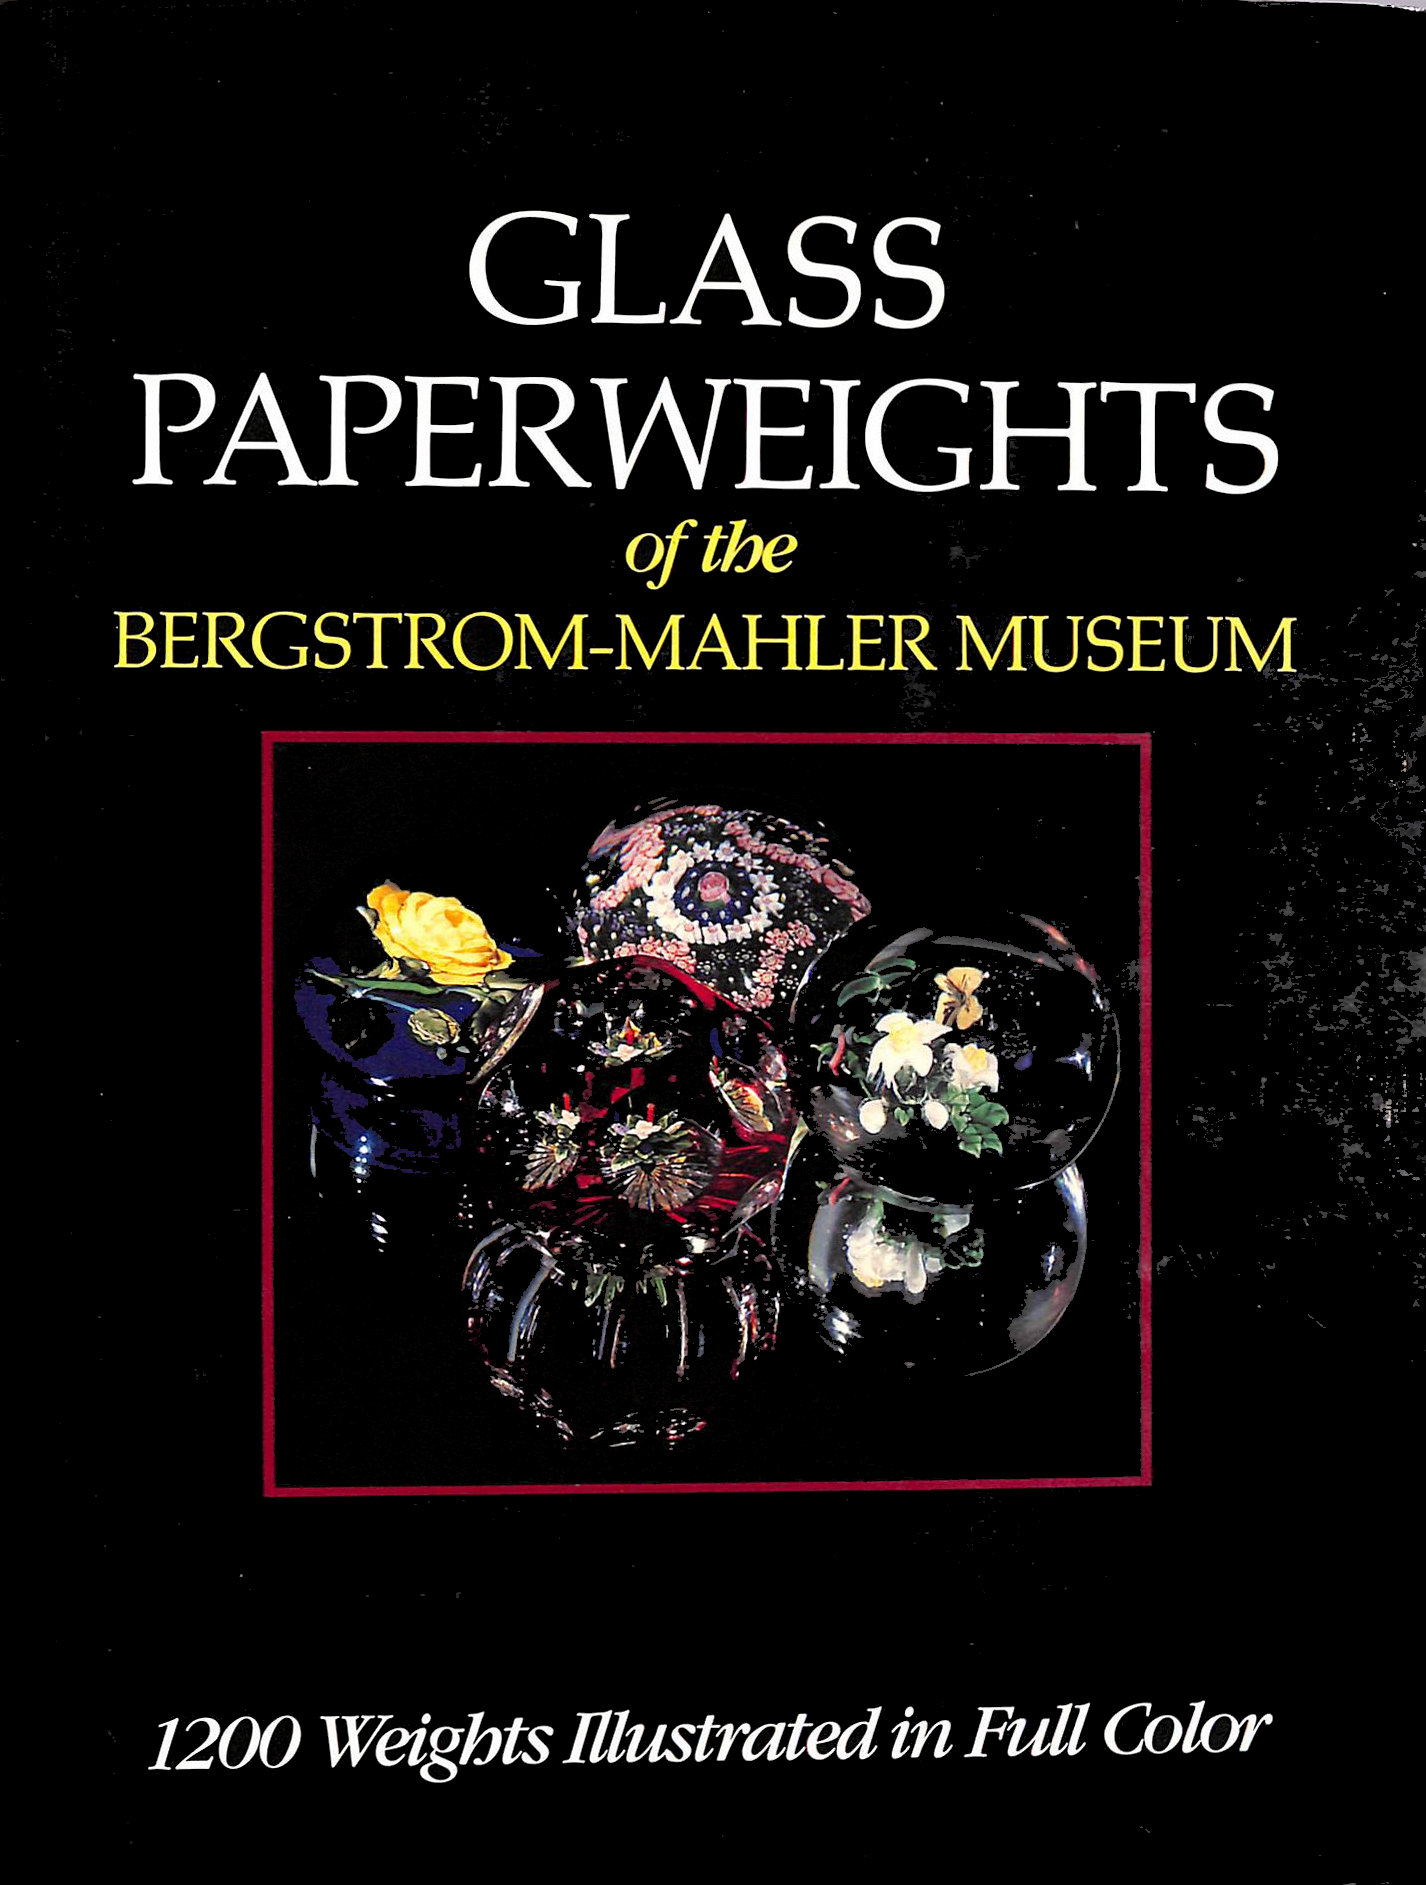 VARIOUS - Glass Paperweights of the Bergstrom-Mahler Museum